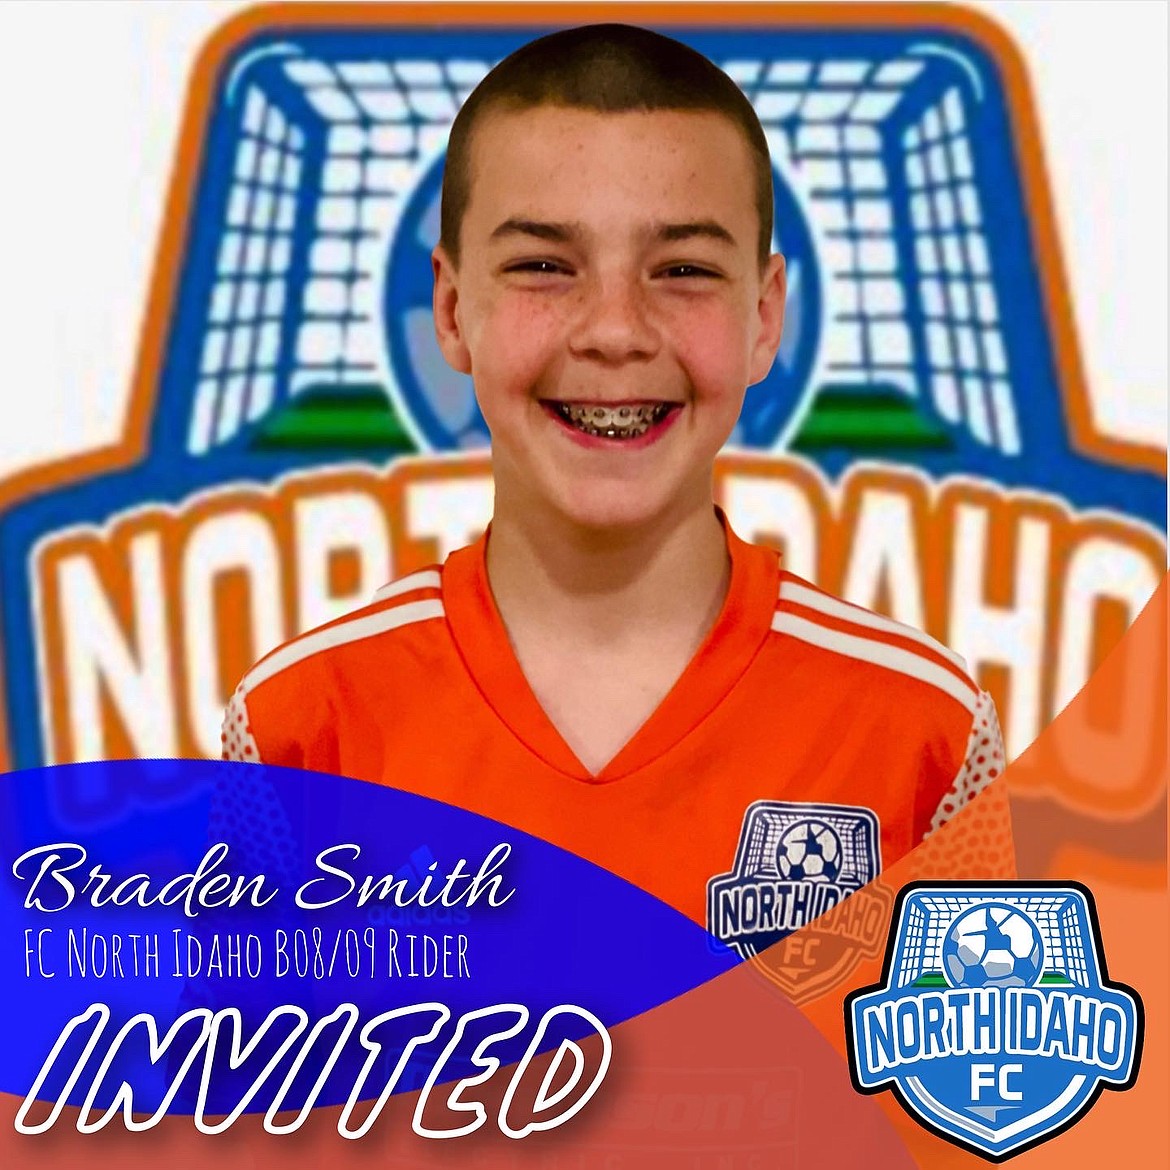 Courtesy photo
Braden Smith, a member of the the FC North Idaho B08/09 Rider team and Idaho 2009 ODP team, has been invited to the US Youth Soccer ODP summer event being held in Salt Lake City this summer. For this event, each state has selected its top players from each age group to attend, represent, and compete. Braden will head to the Real Salt Lake City Training Academy in July to compete against some of the top players in hopes to earn his way to Florida.